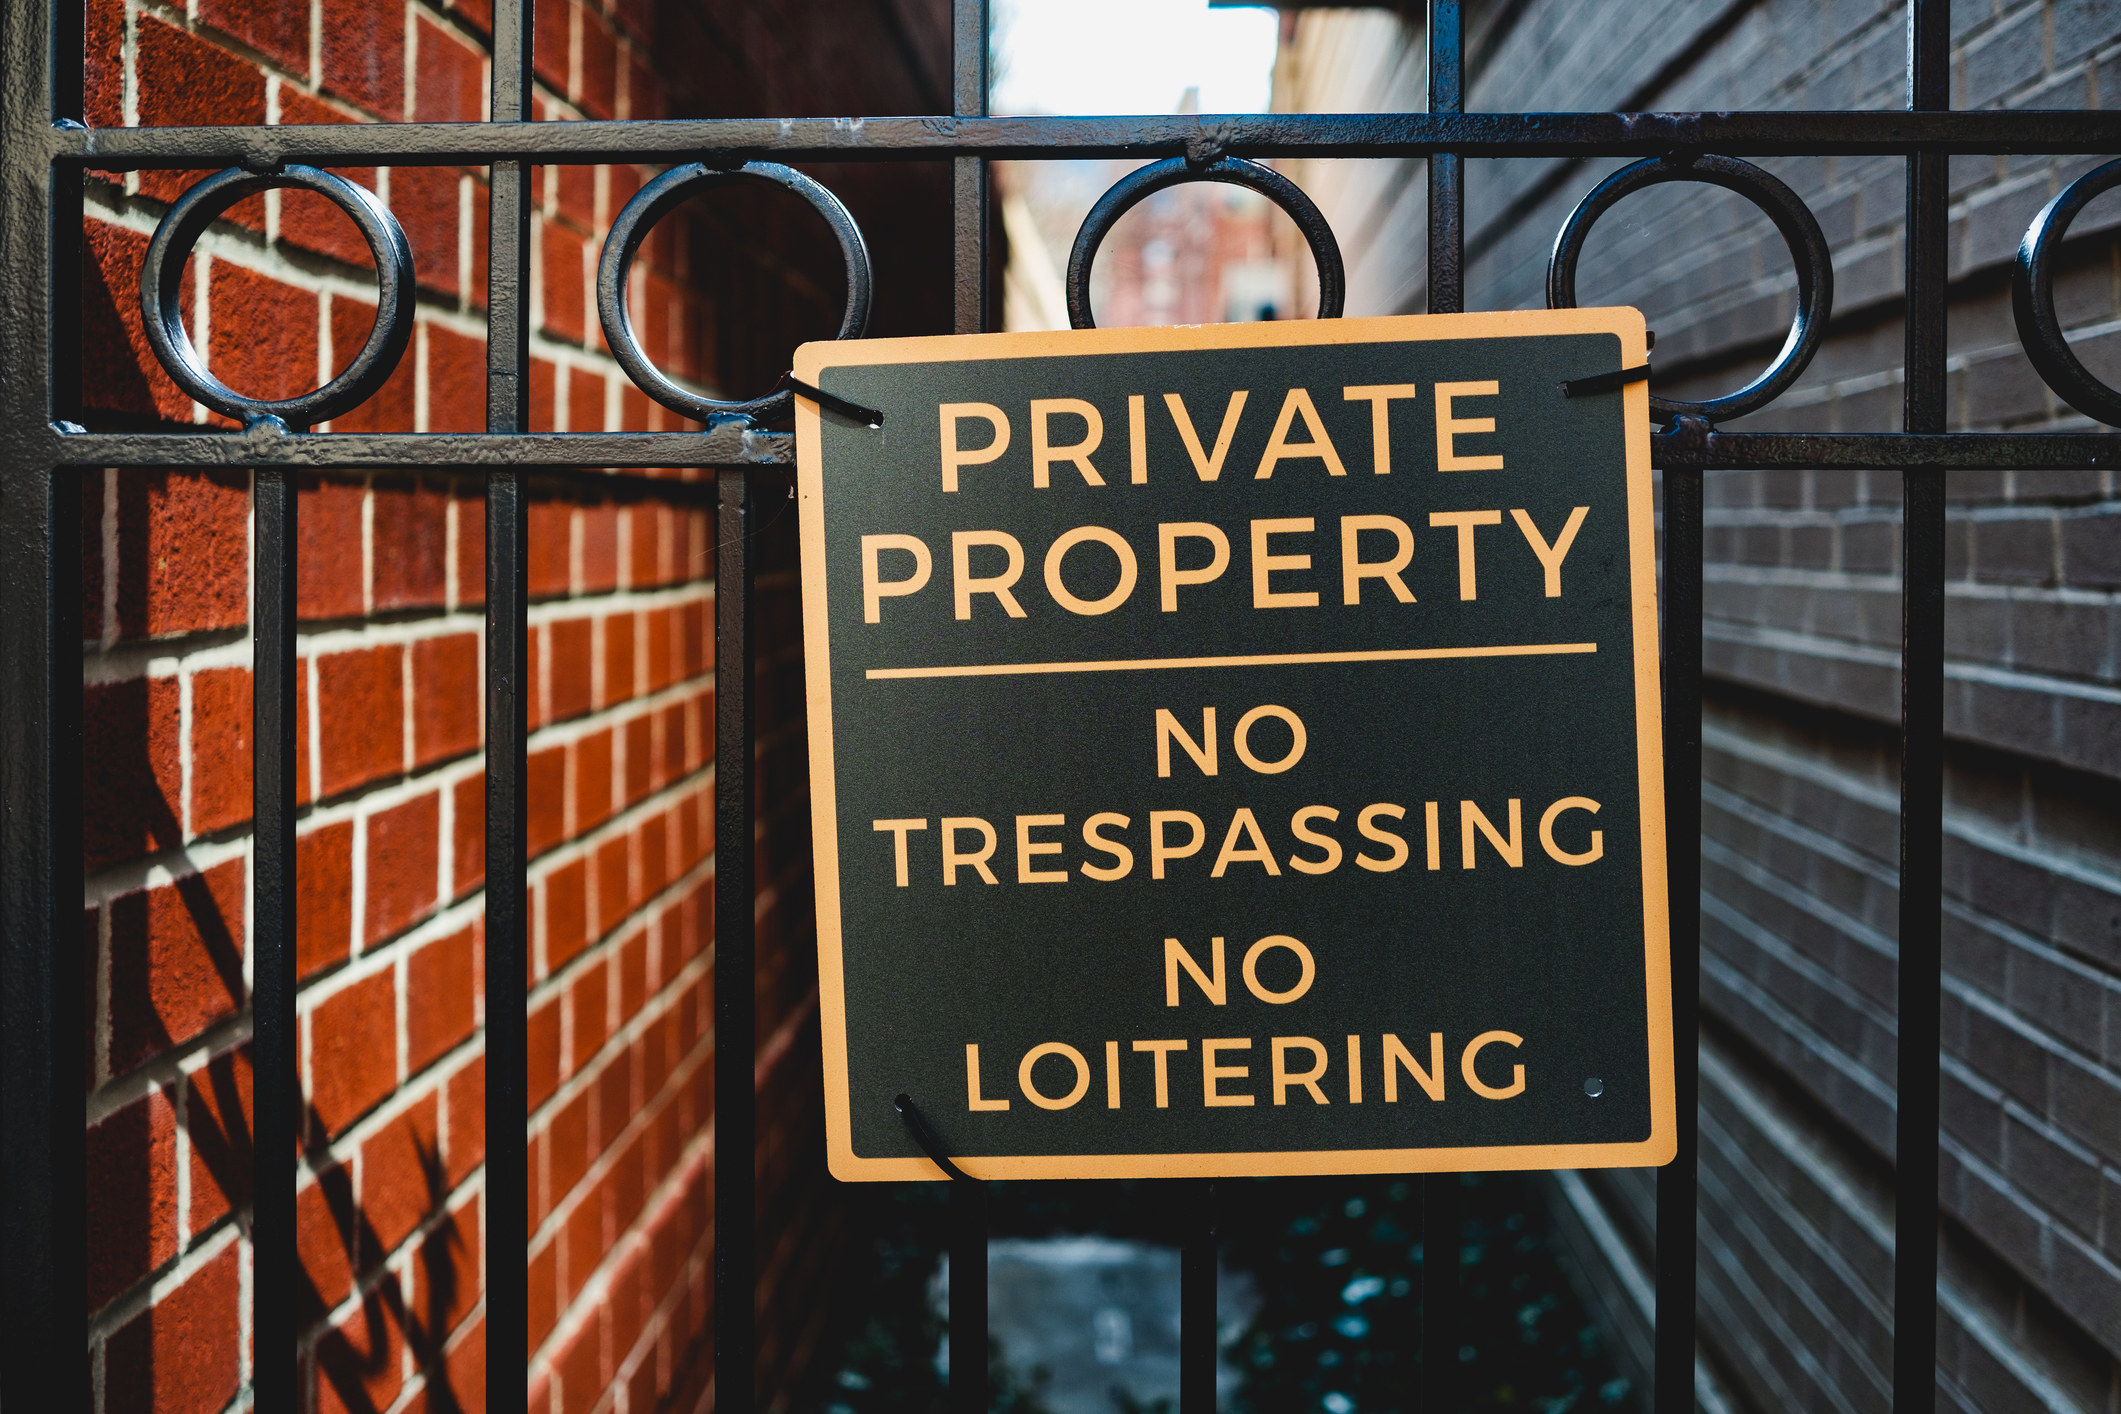 A Private Property sign